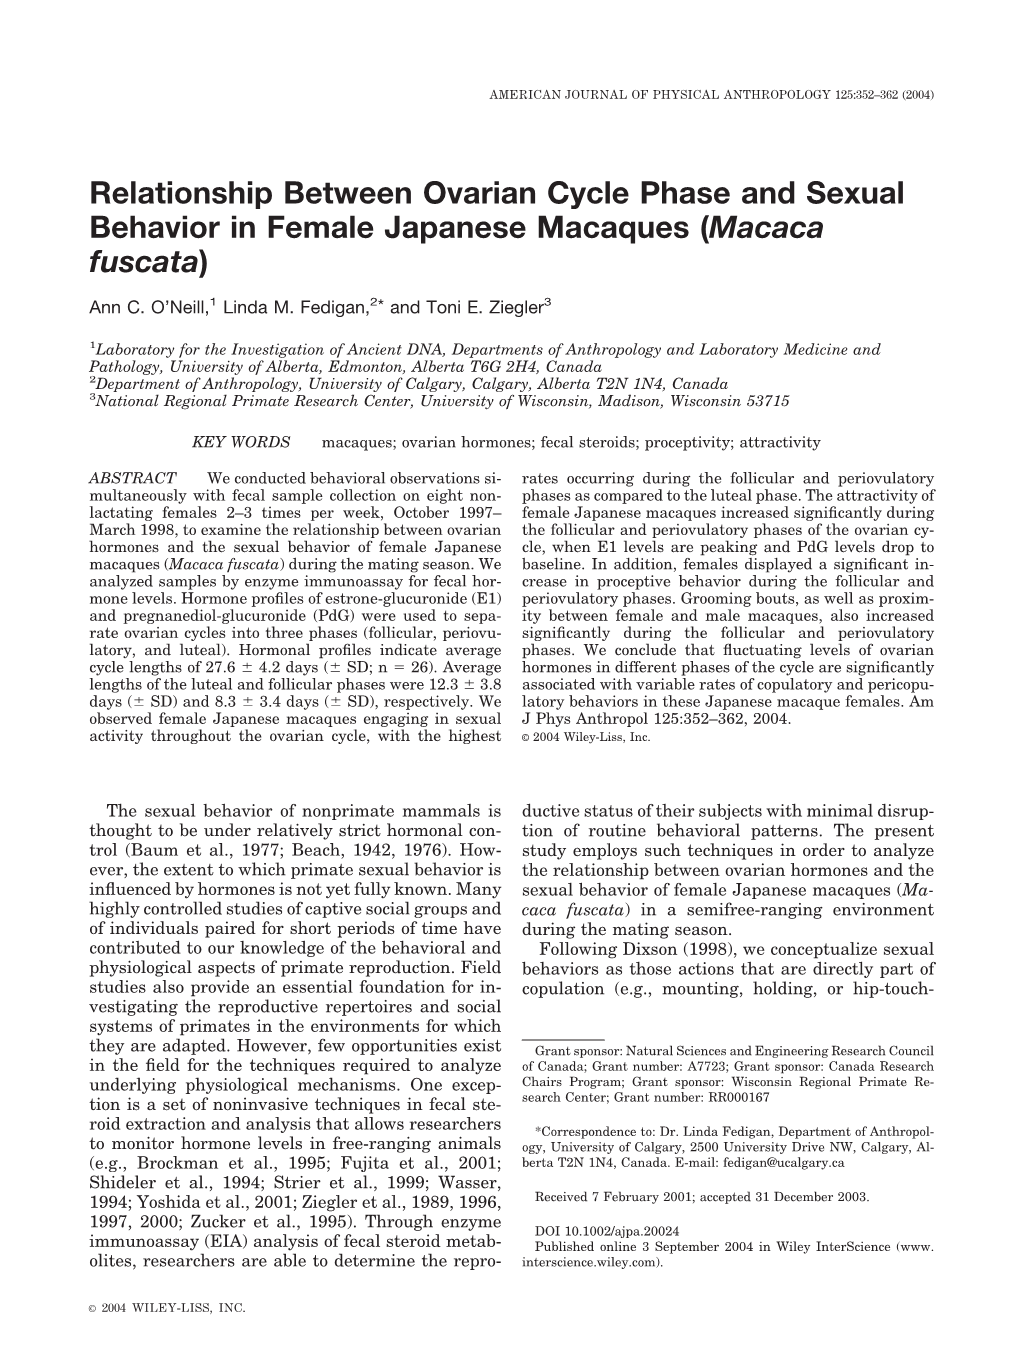 Relationship Between Ovarian Cycle Phase and Sexual Behavior in Female Japanese Macaques (Macaca Fuscata)